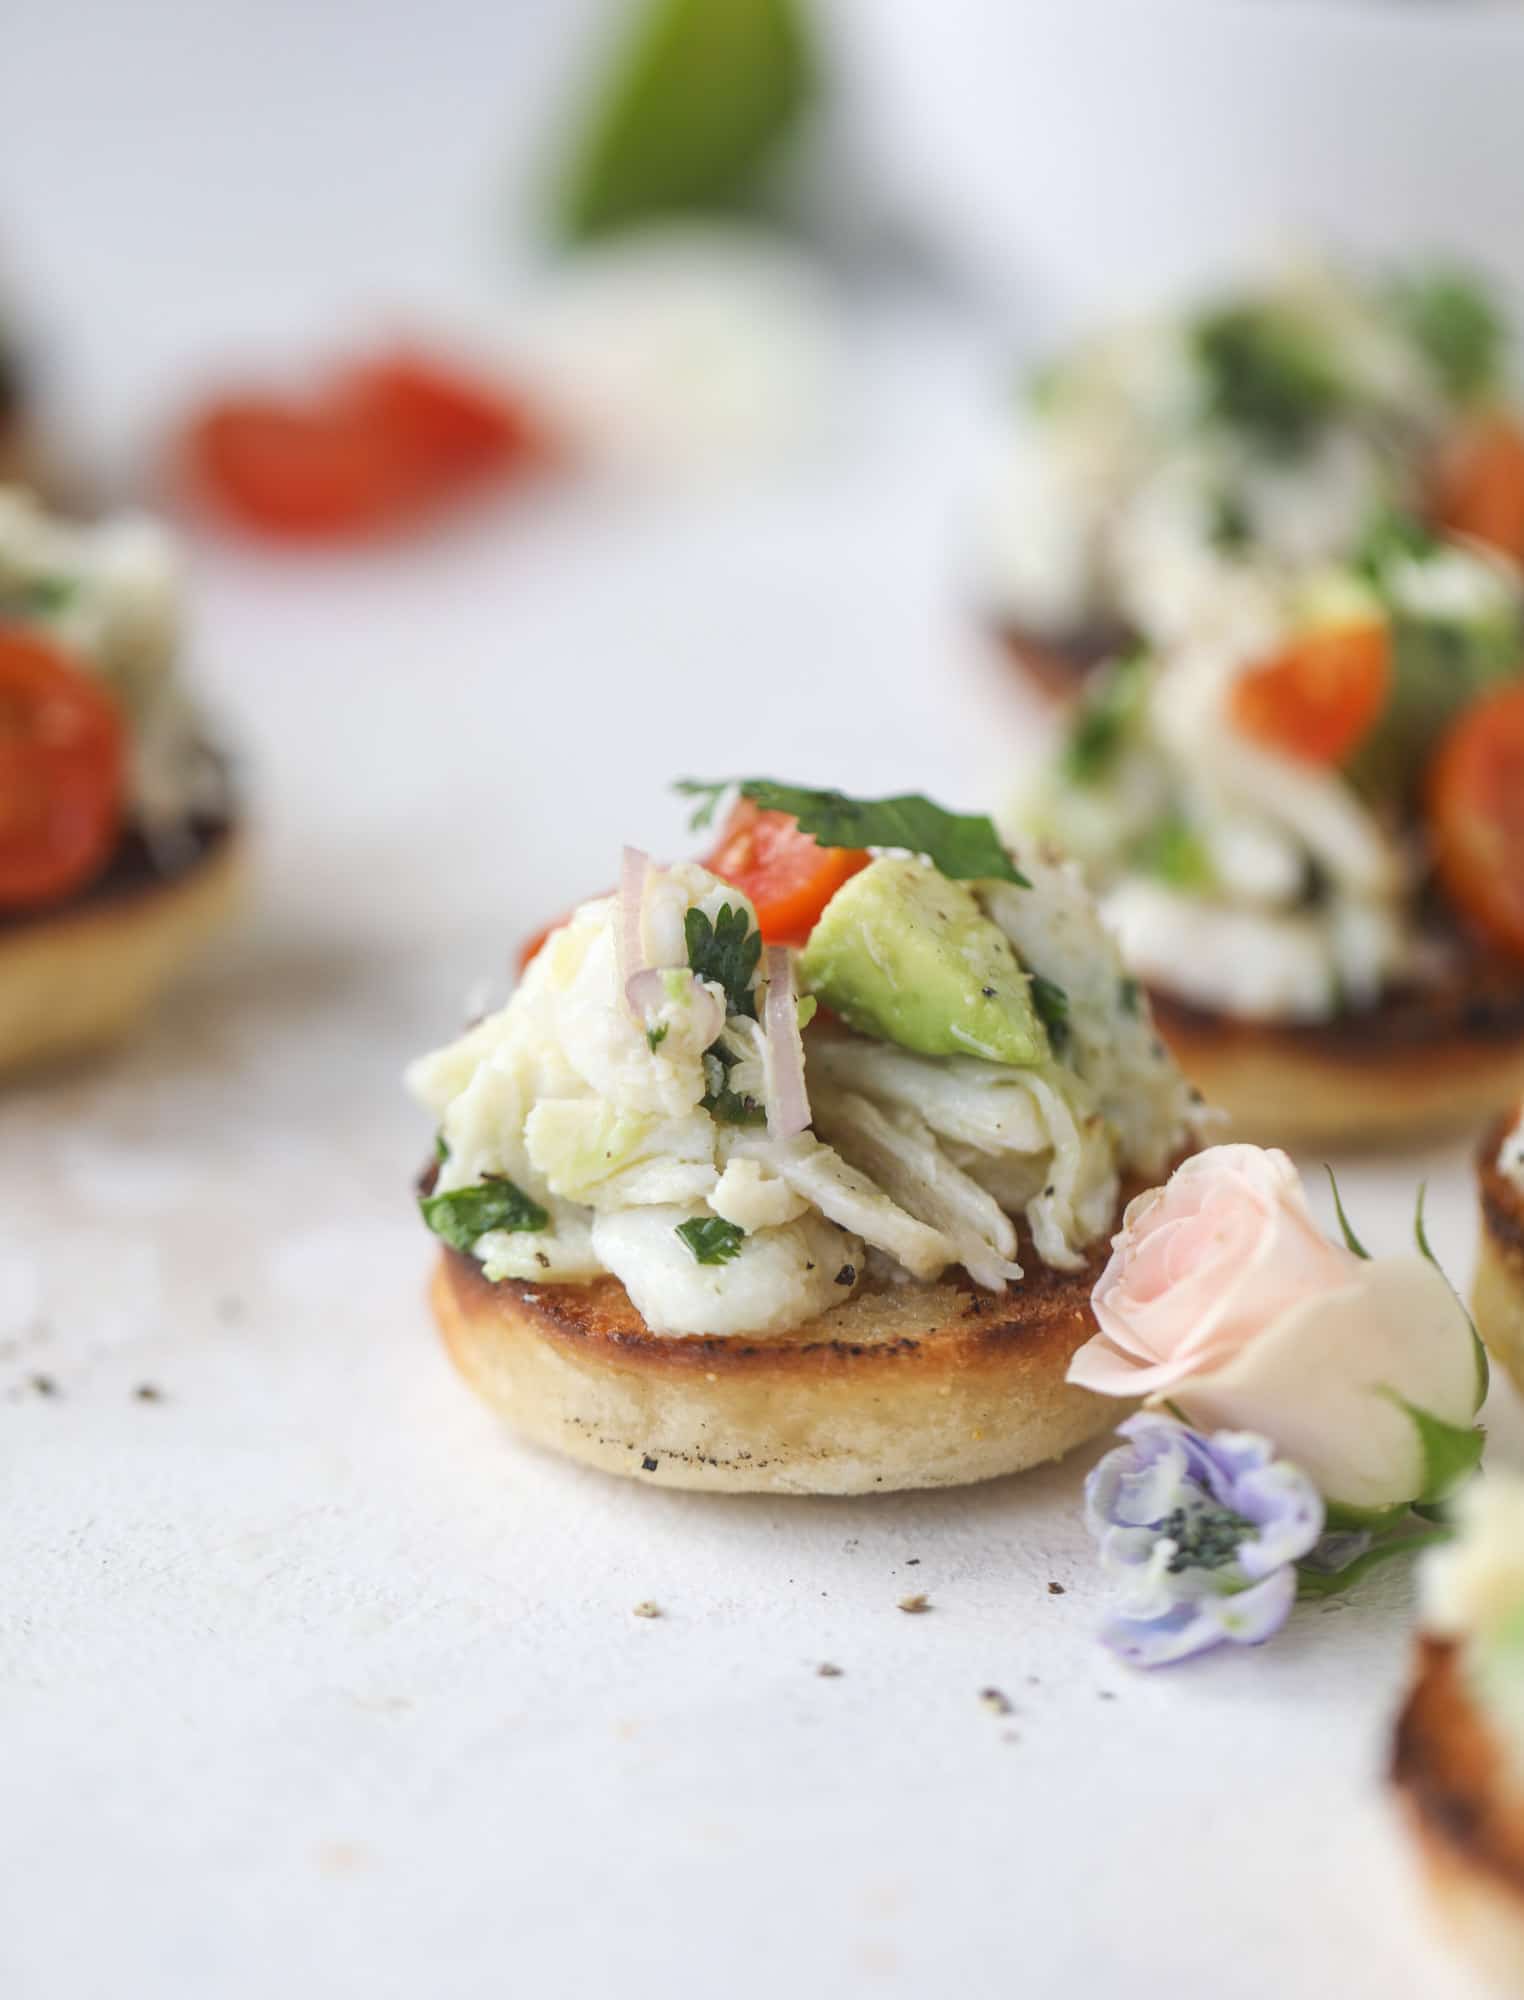 The cutest crab salad toasts are perfect for a snack, appetizer or light meal with a greens salad. This avocado crab salad is so refreshing and light!